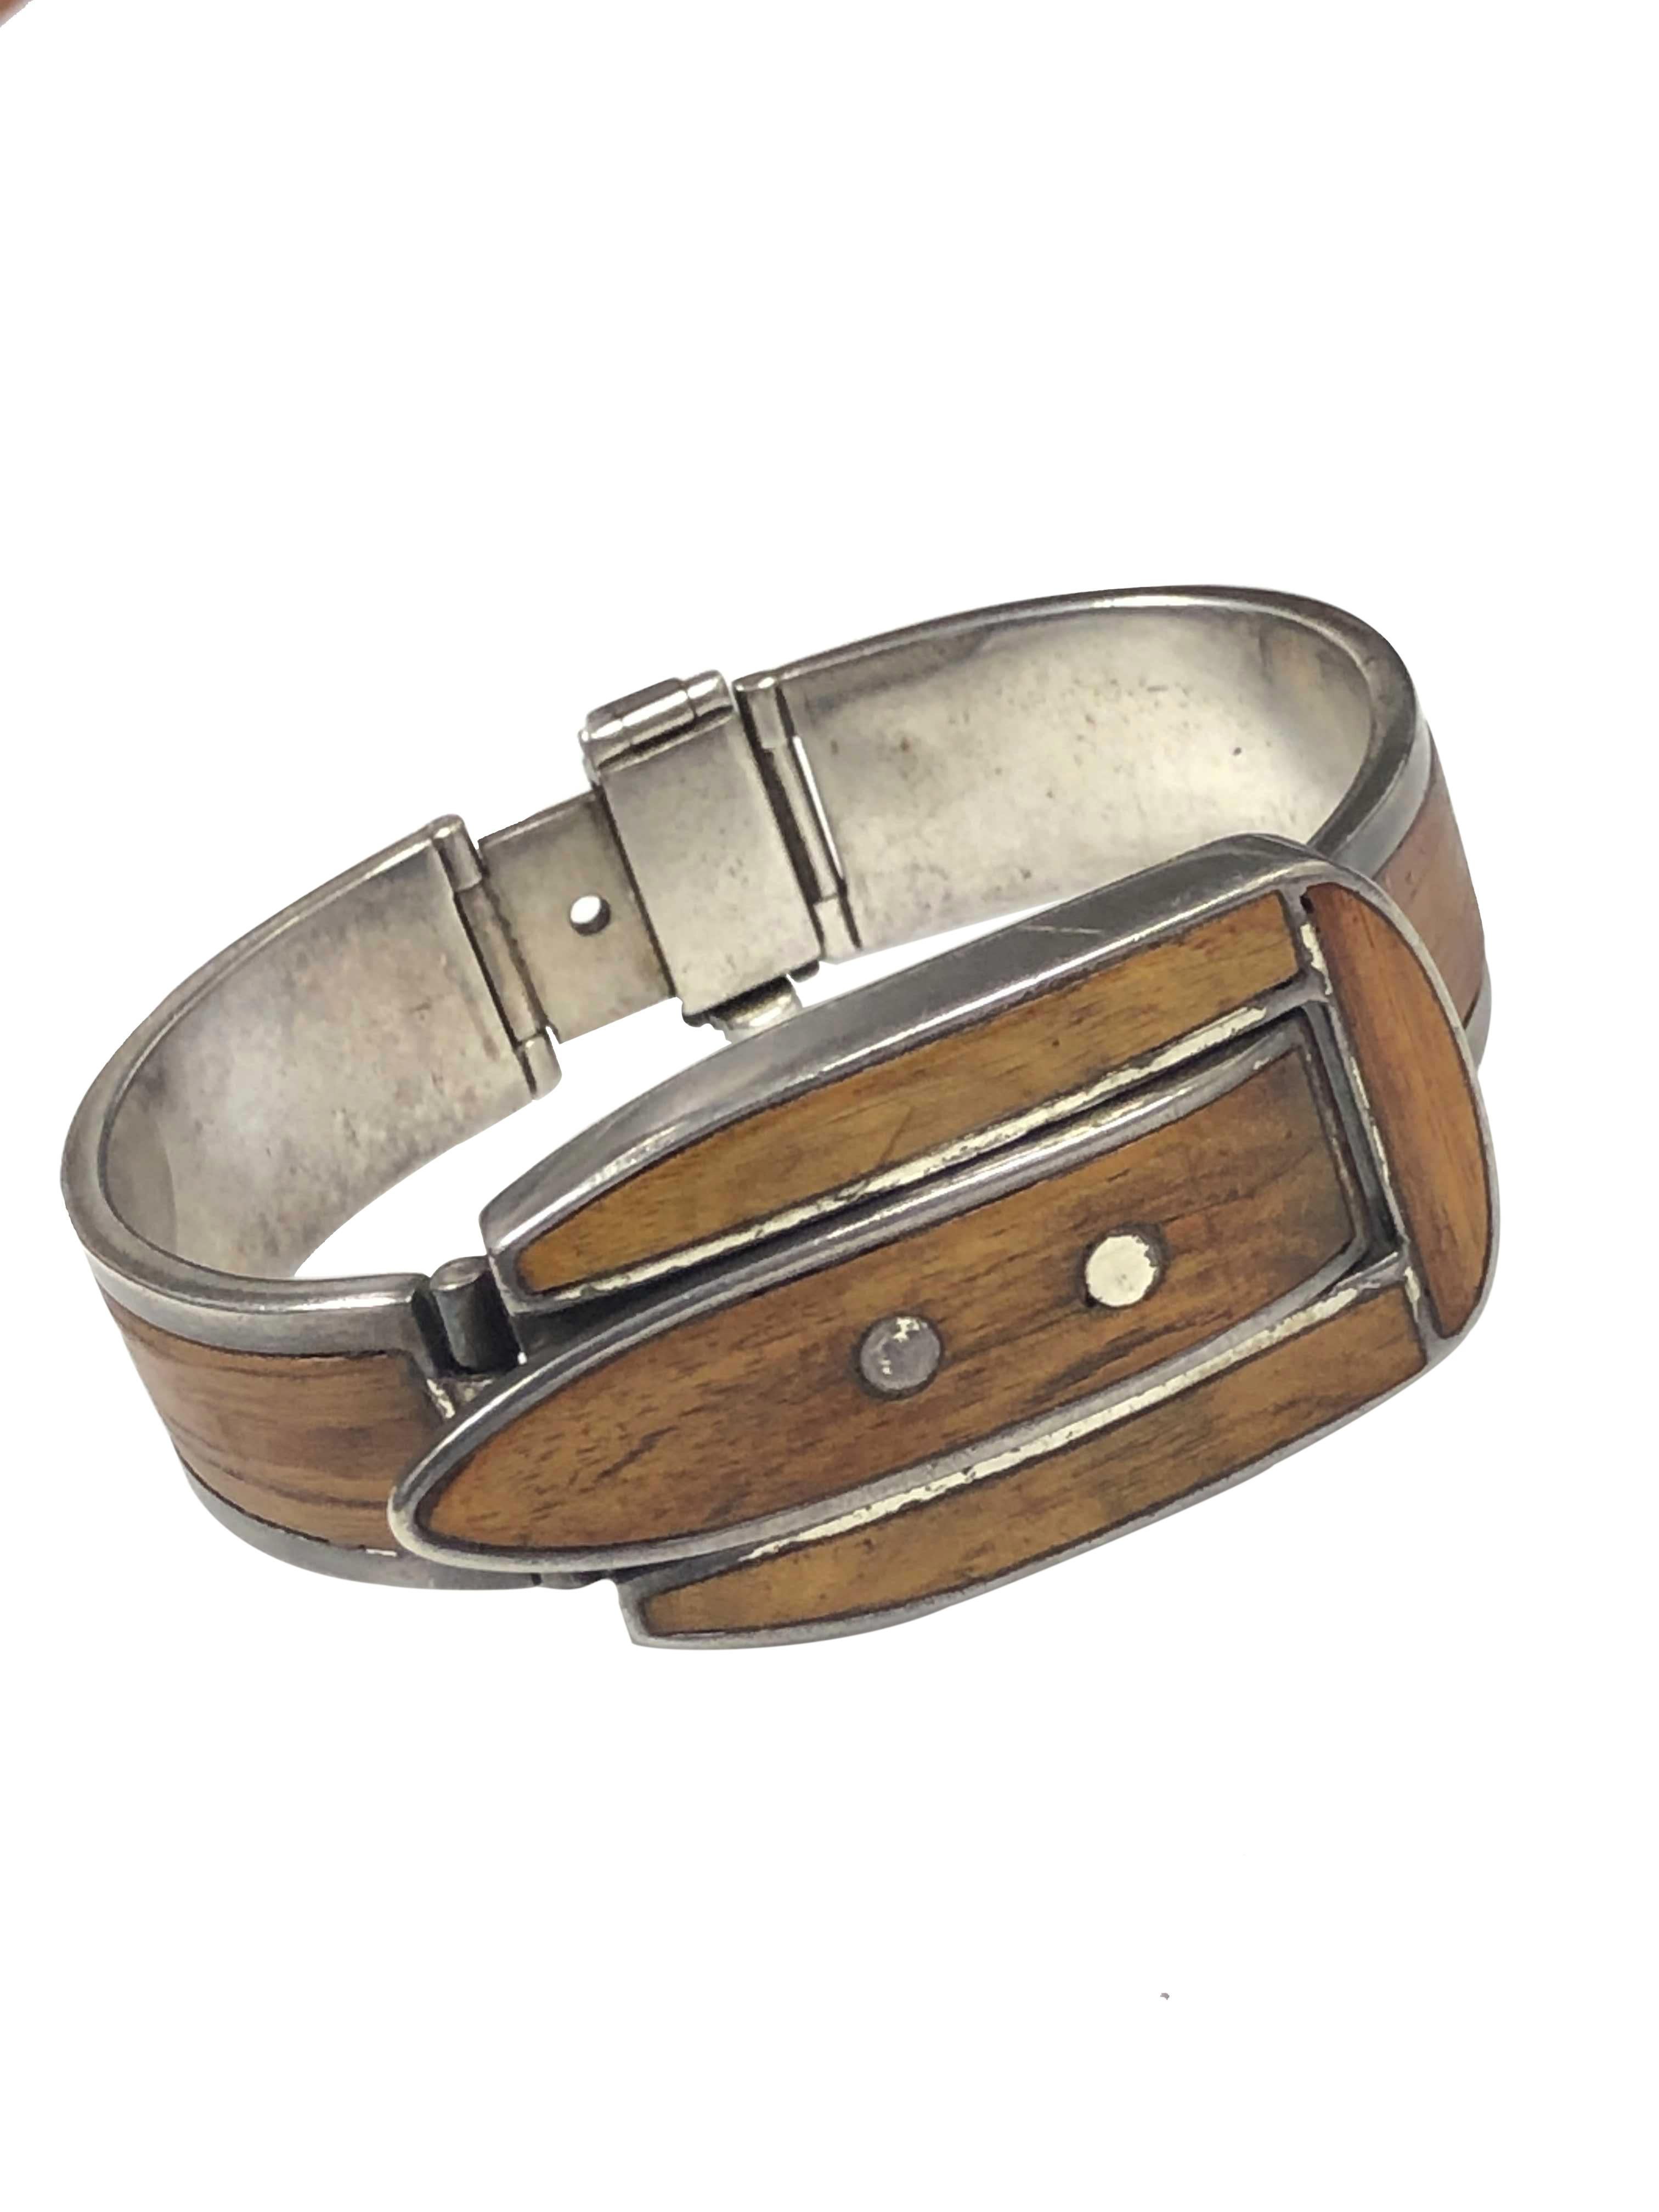 Circa 1960s Gucci Sterling Silver and Wood Bracelet Wrist Watch, the buckle form center section measures 1 3/4 X 1 inch, a simple lift up and snap down cover reveals a White Dial manual wind hidden watch. The 5/8 inch bracelet is set with solid